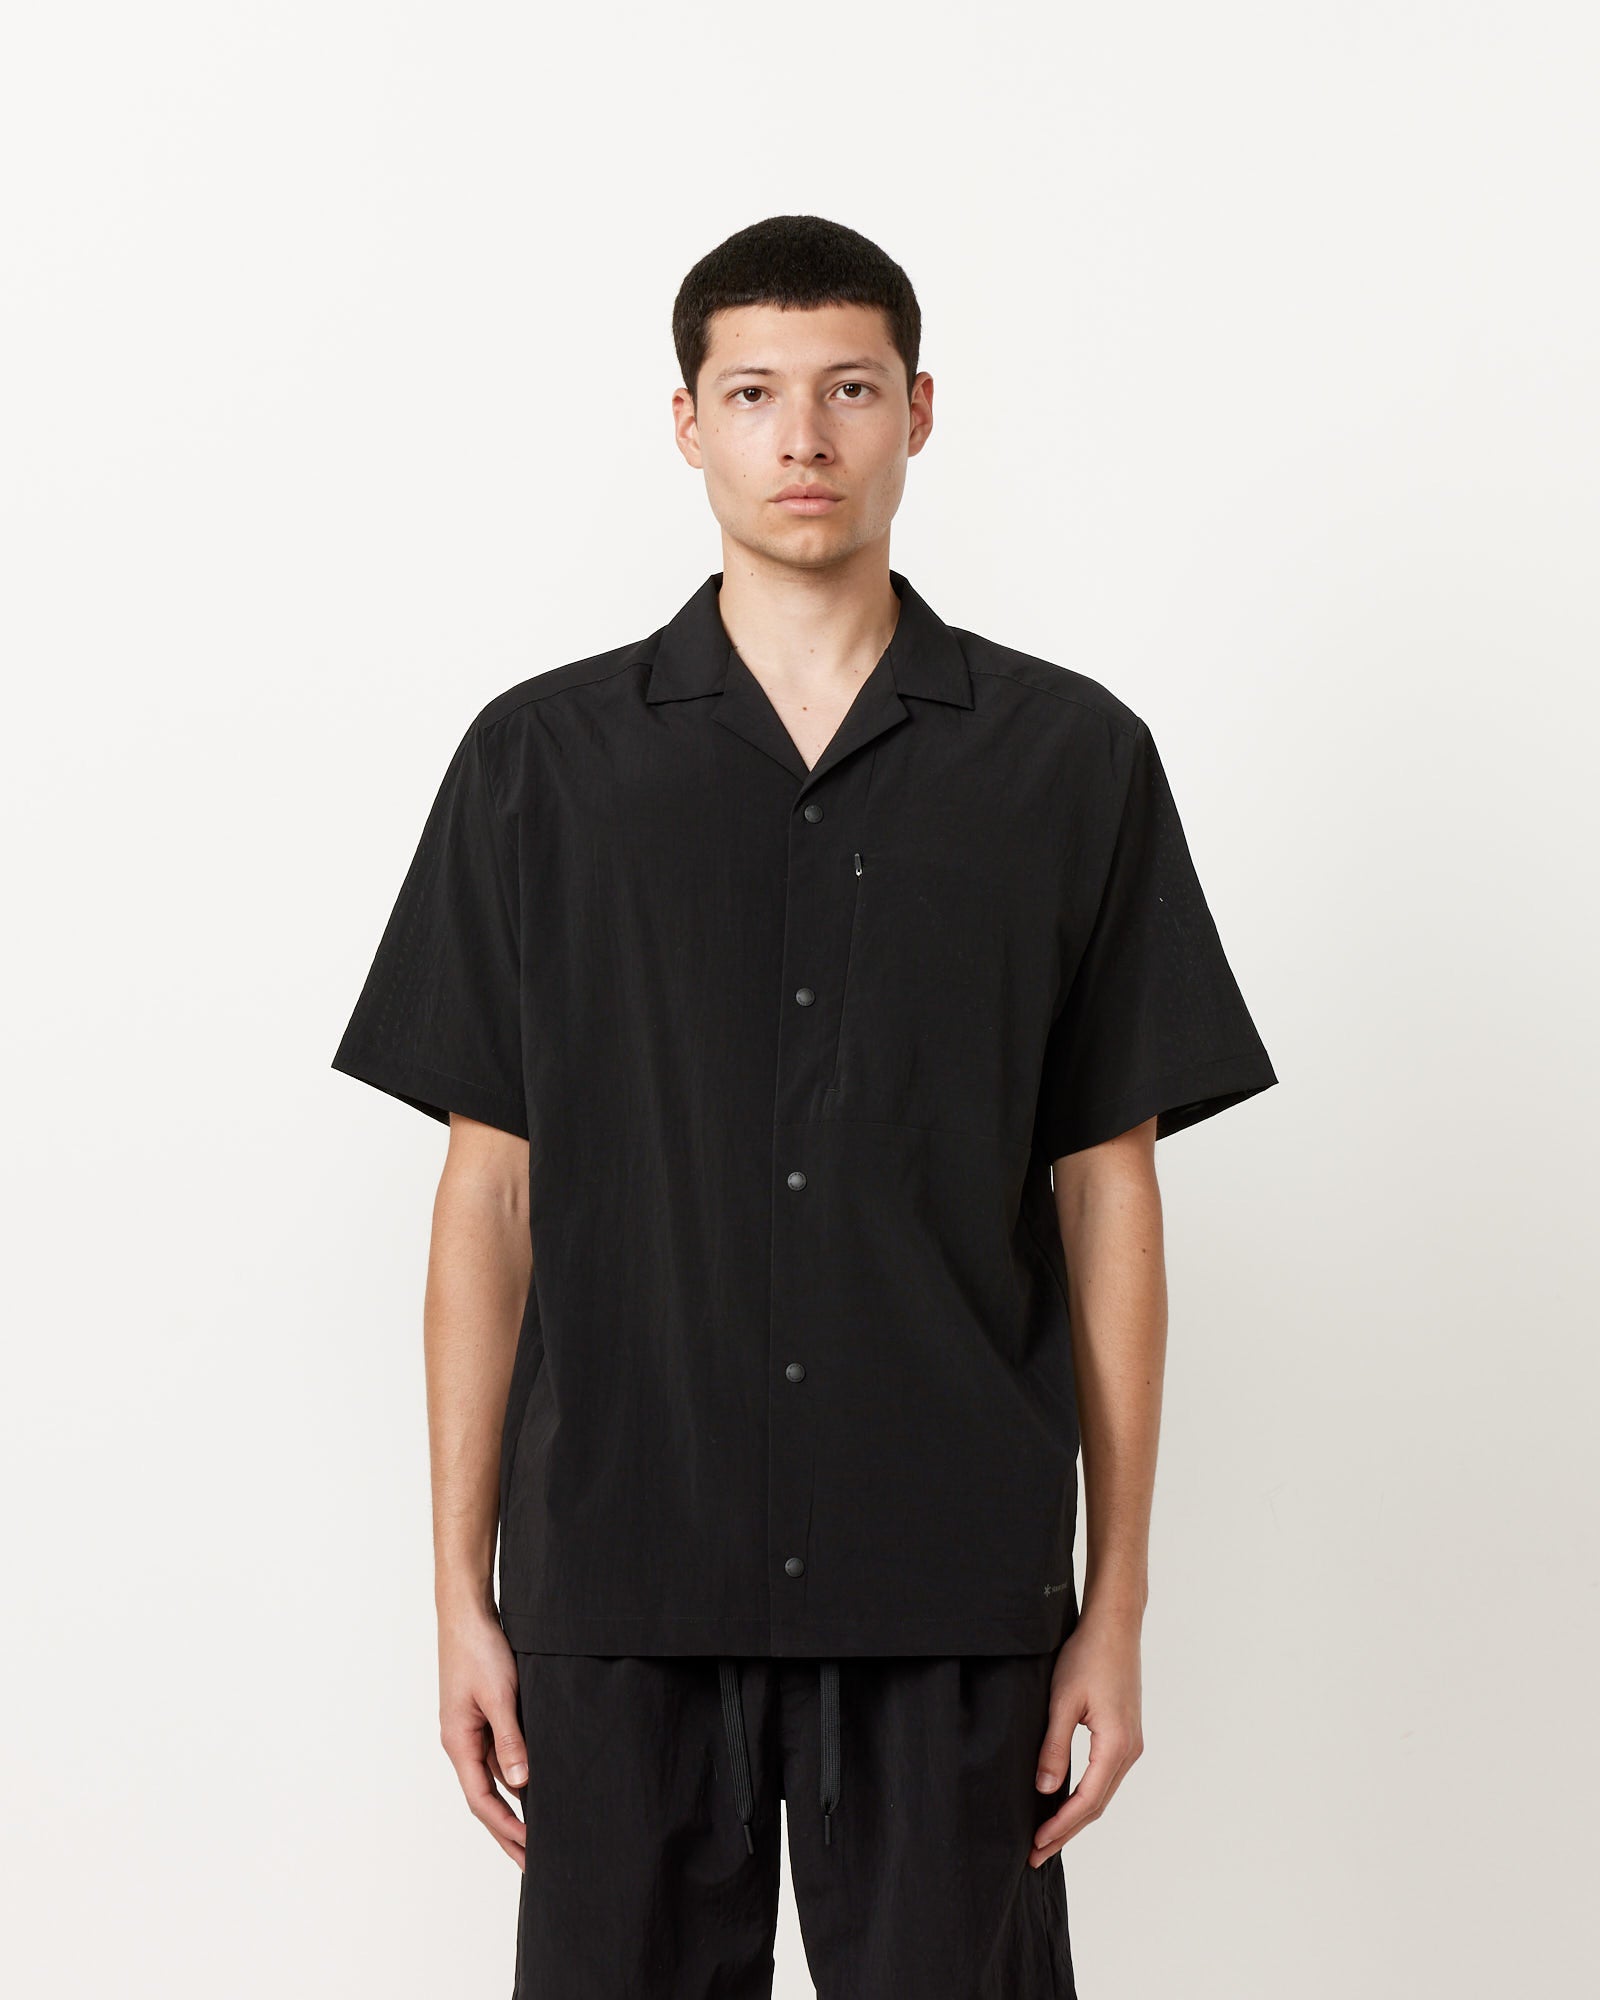 Breathable Quick Dry Shirt in Black